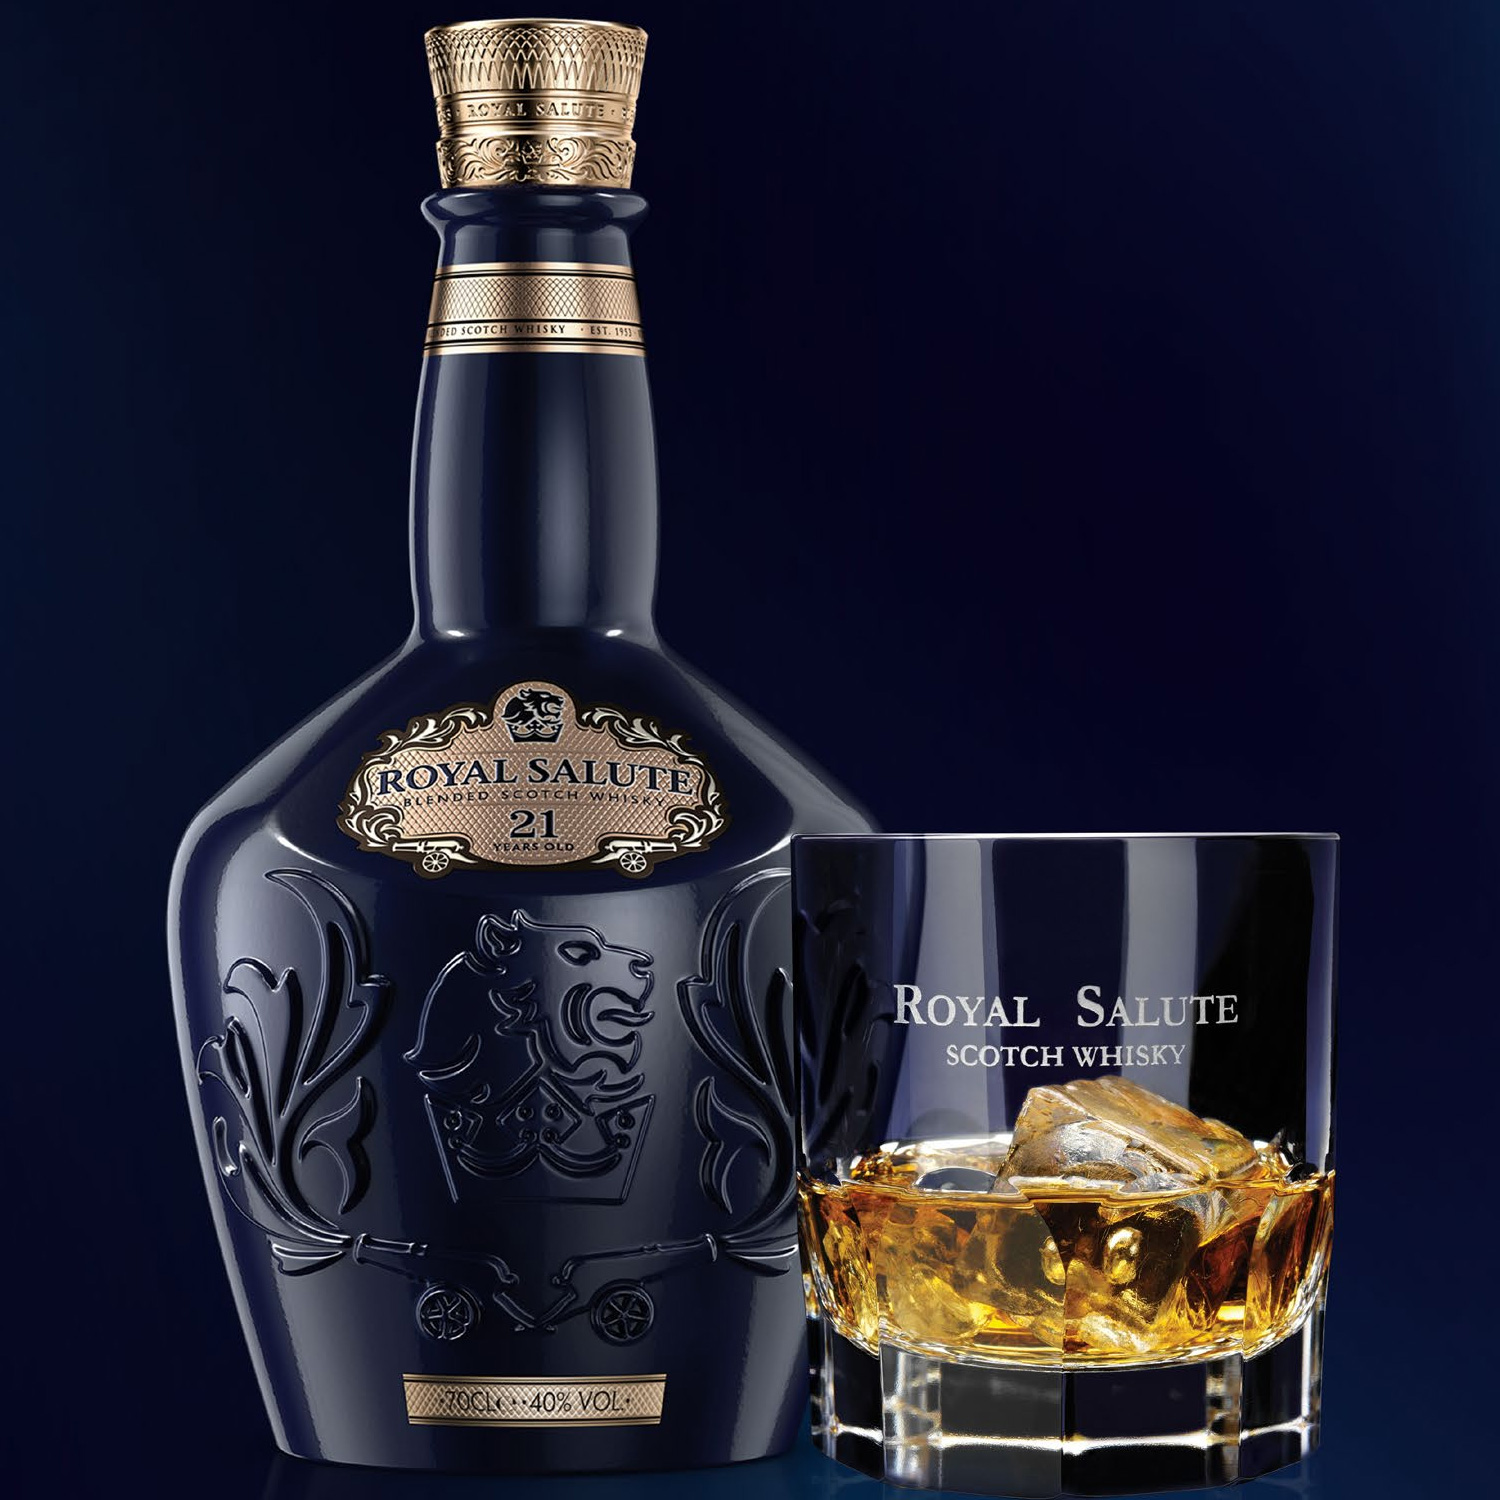 Chivas Brothers Royal Salute 21 Year Old